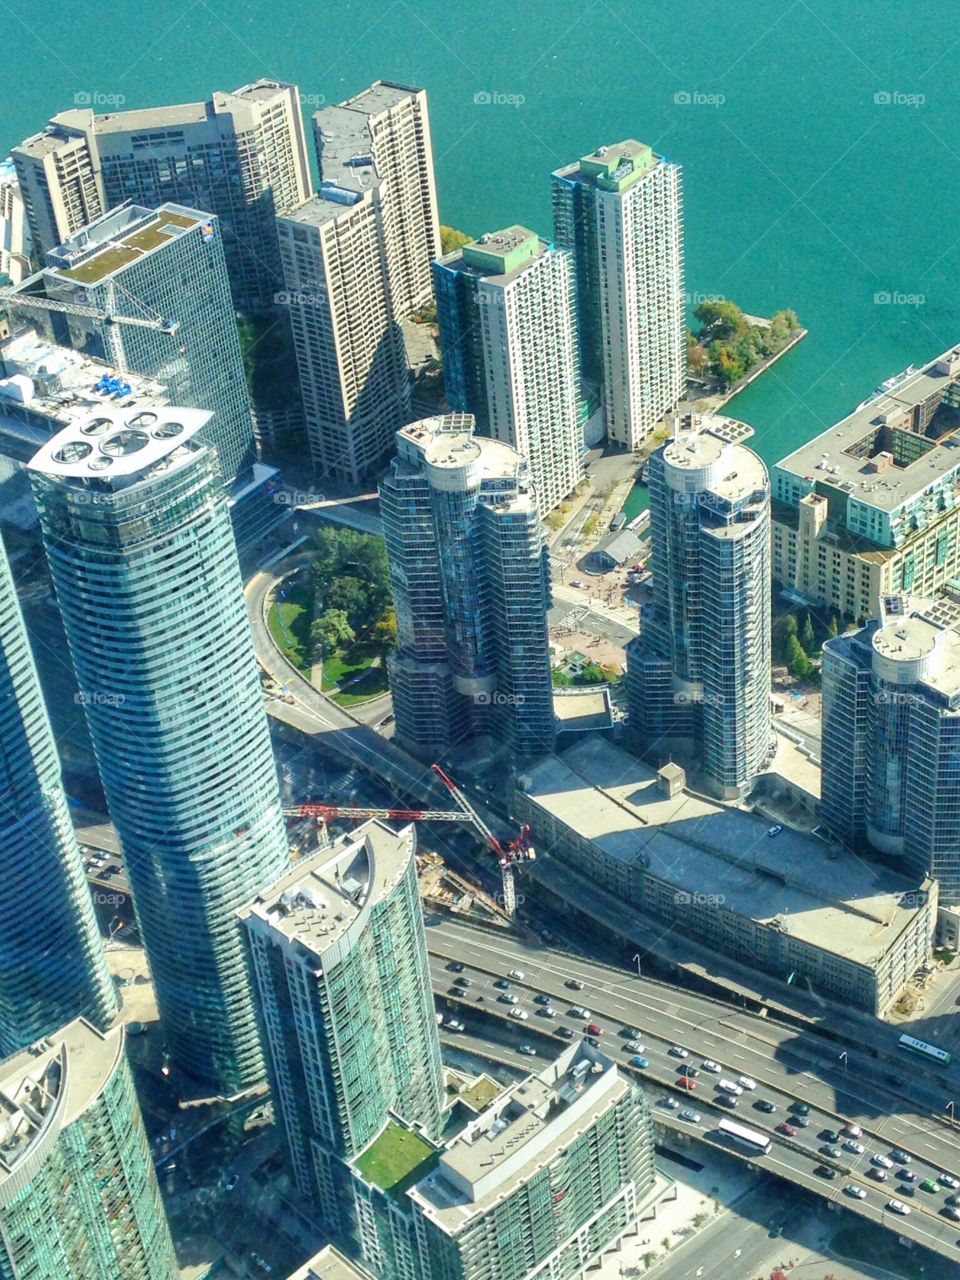 Toronto. View from the top